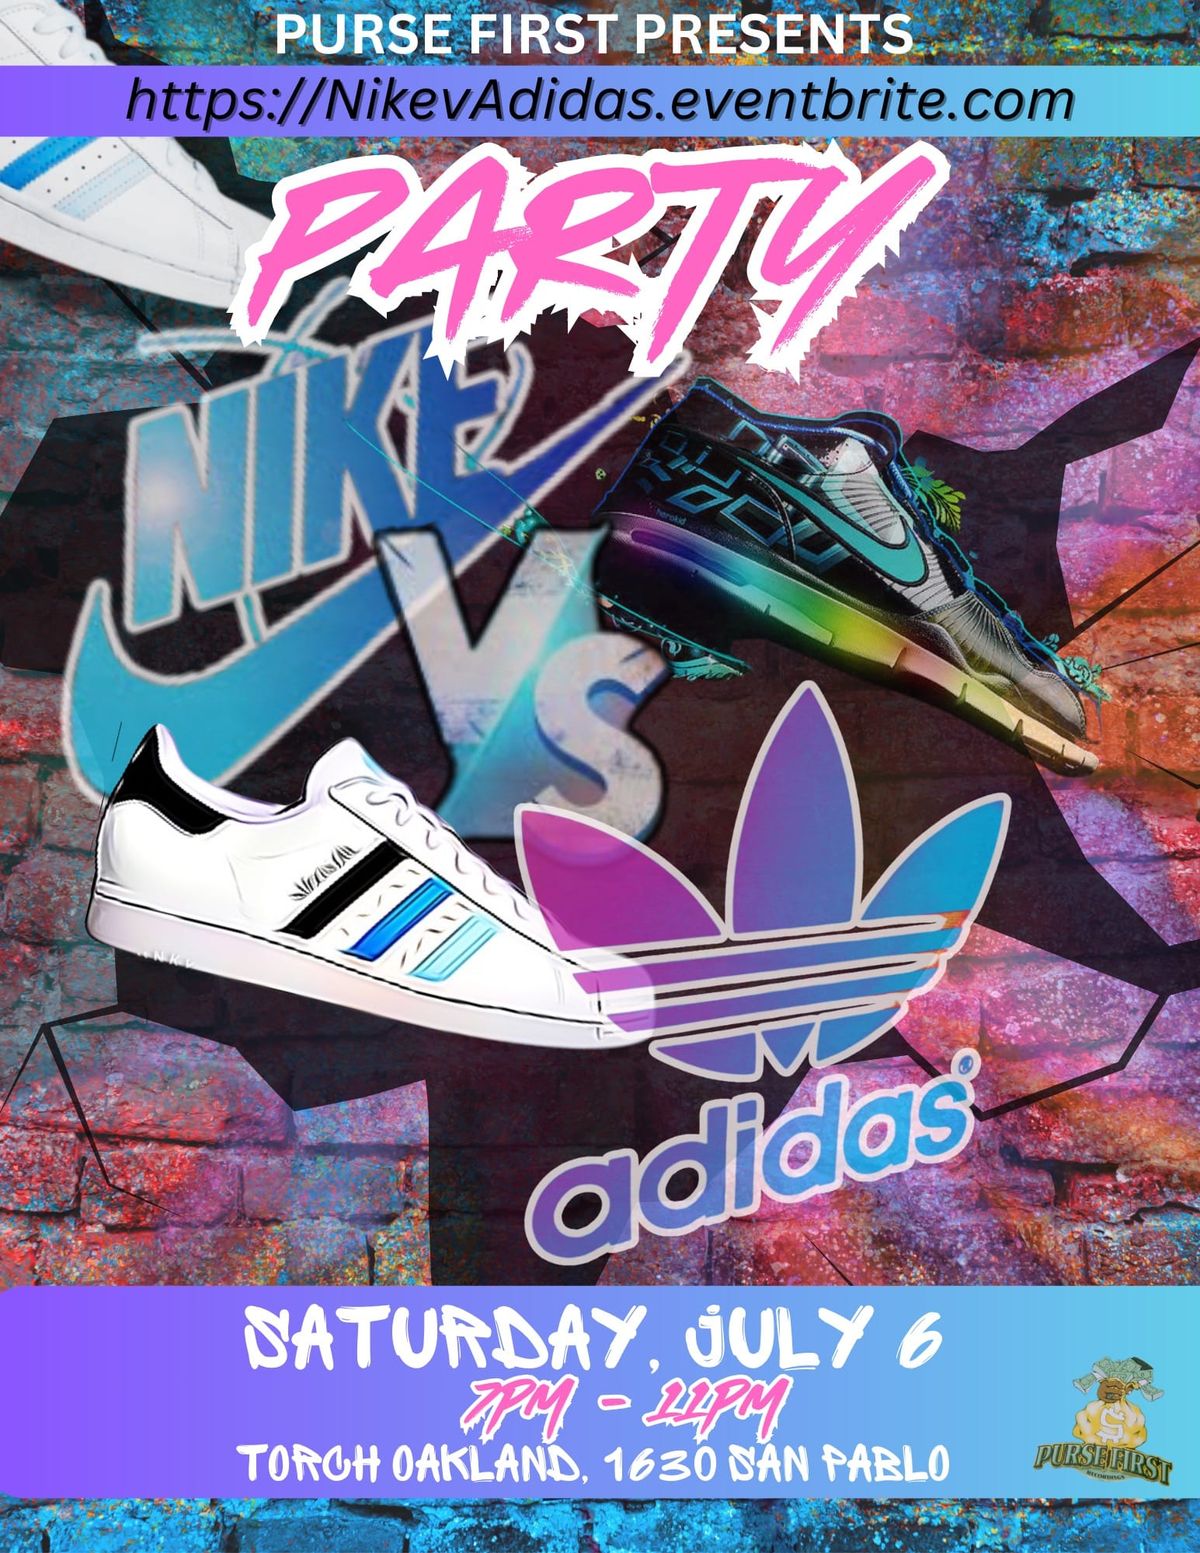 The Nike vs Adidas Party